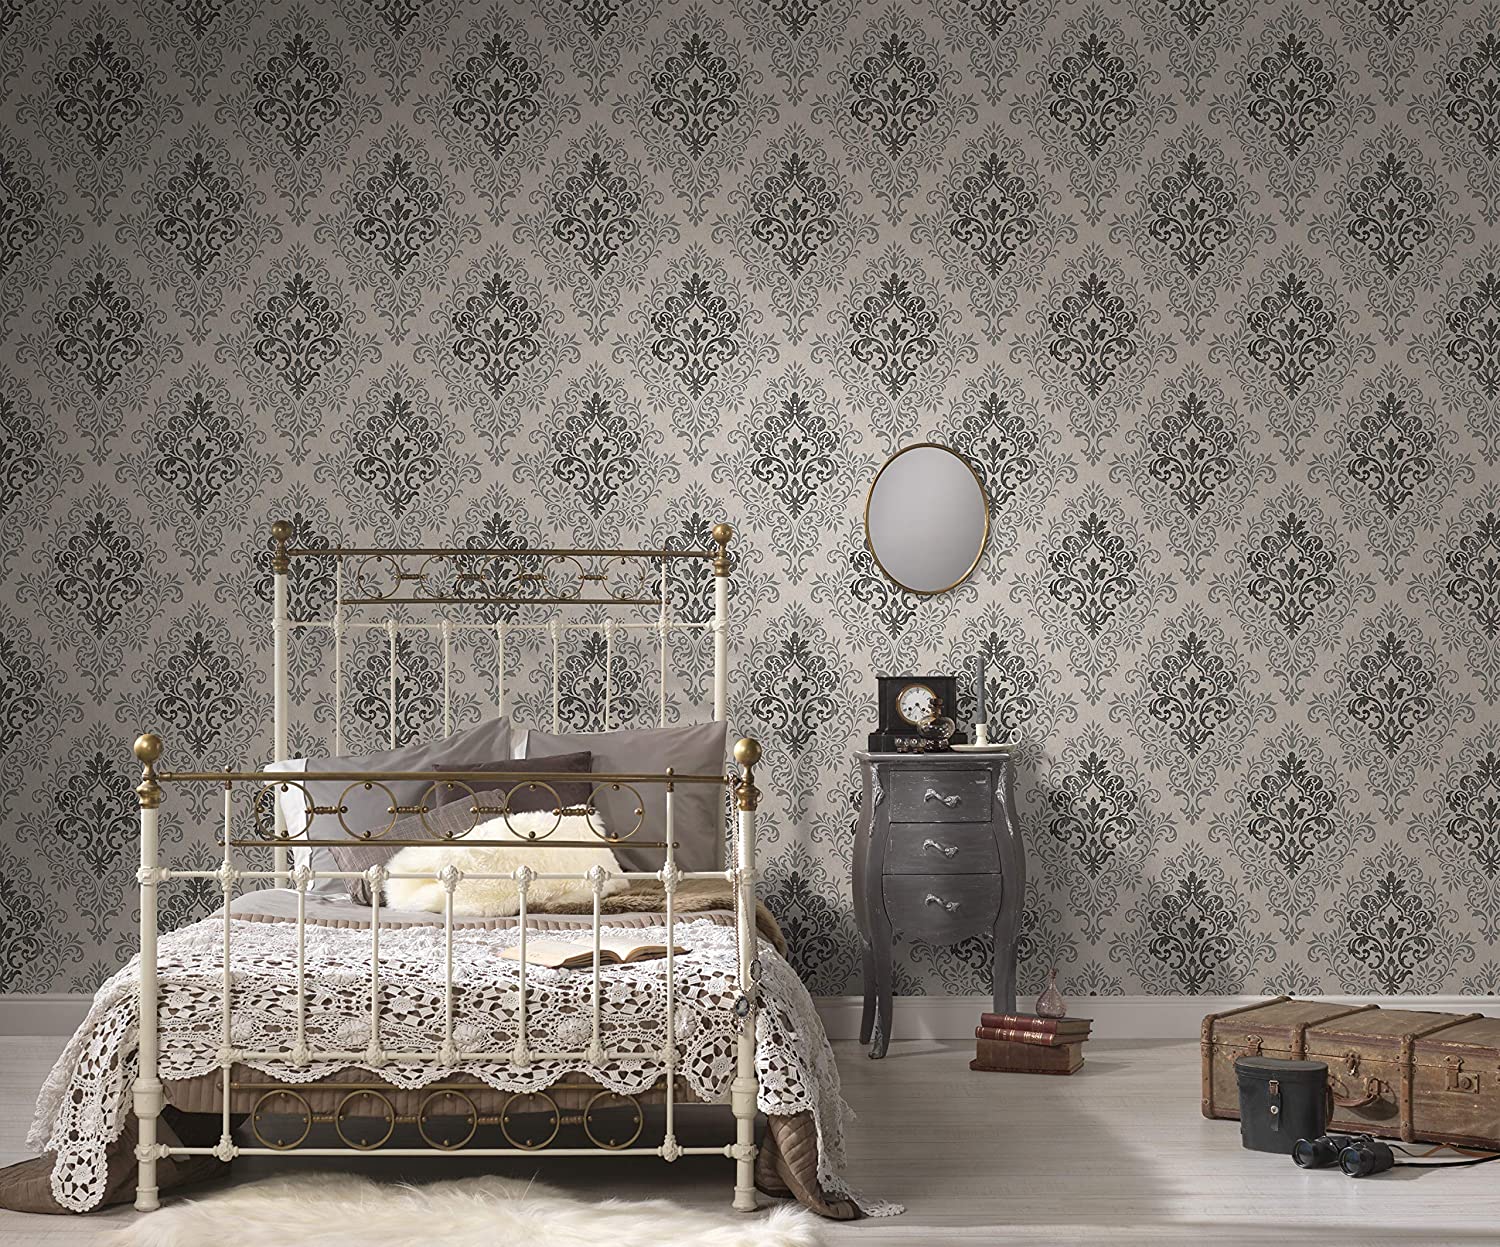 Livingwalls Jette Joop 339241 33924-1 Non-Woven Wallpaper with Ornaments Baroque 10.05 m x 0.53 m Grey Metallic Black Made in Germany